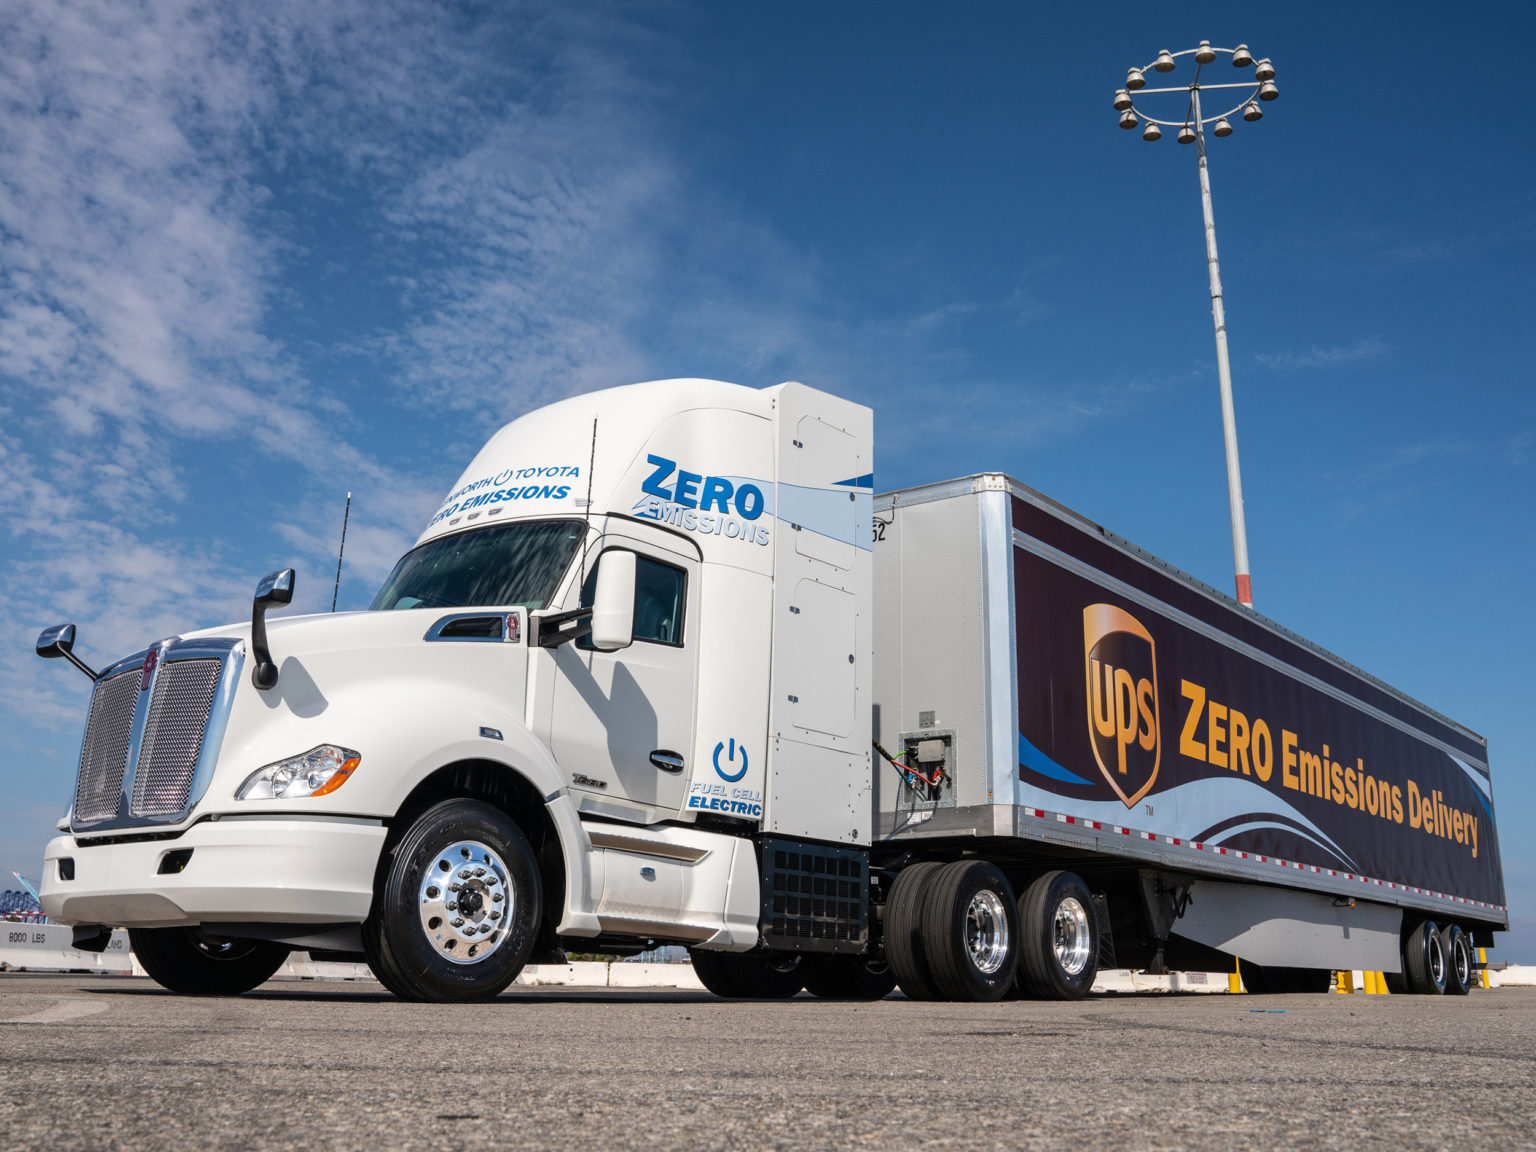 Toyota and Kenworth have joined together to develop fuel cell electric heavy-duty trucks.